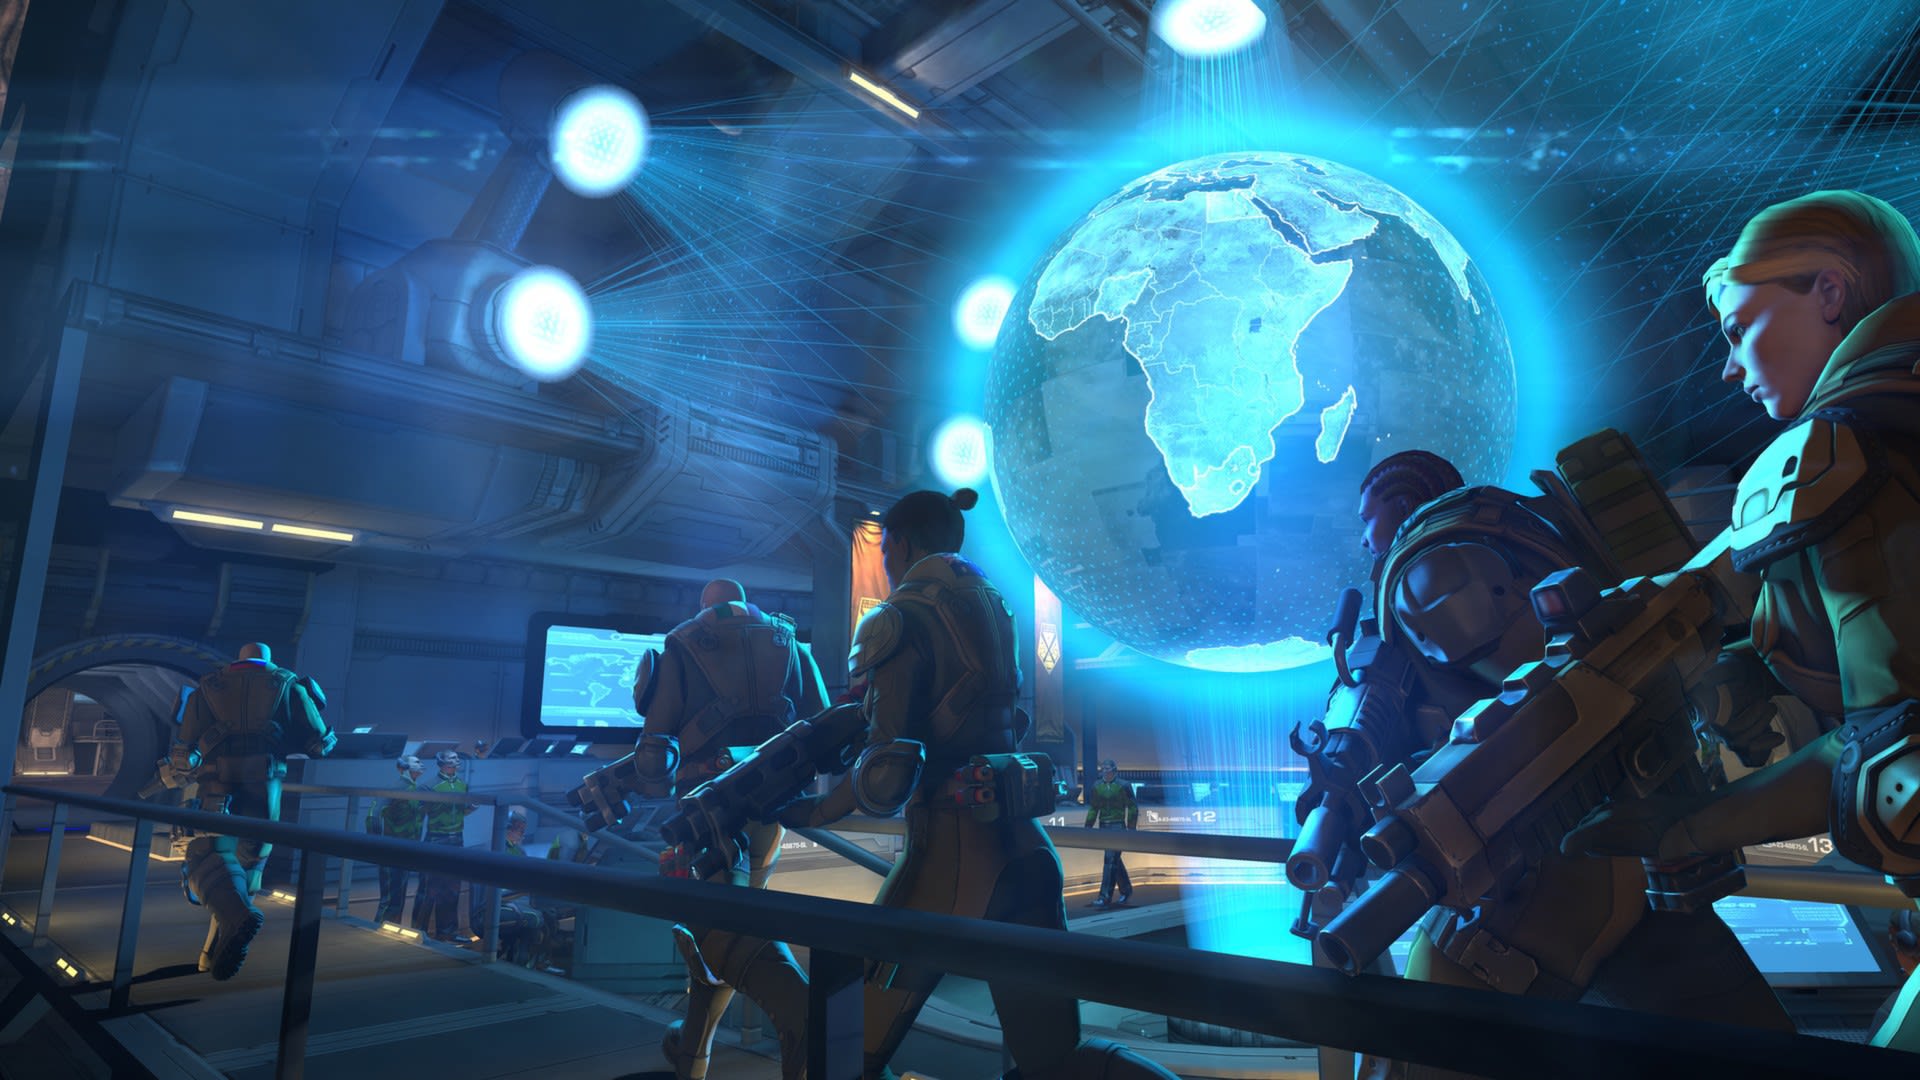 XCOM: Enemy Unknown screenshot showing soldiers walking through a command center.